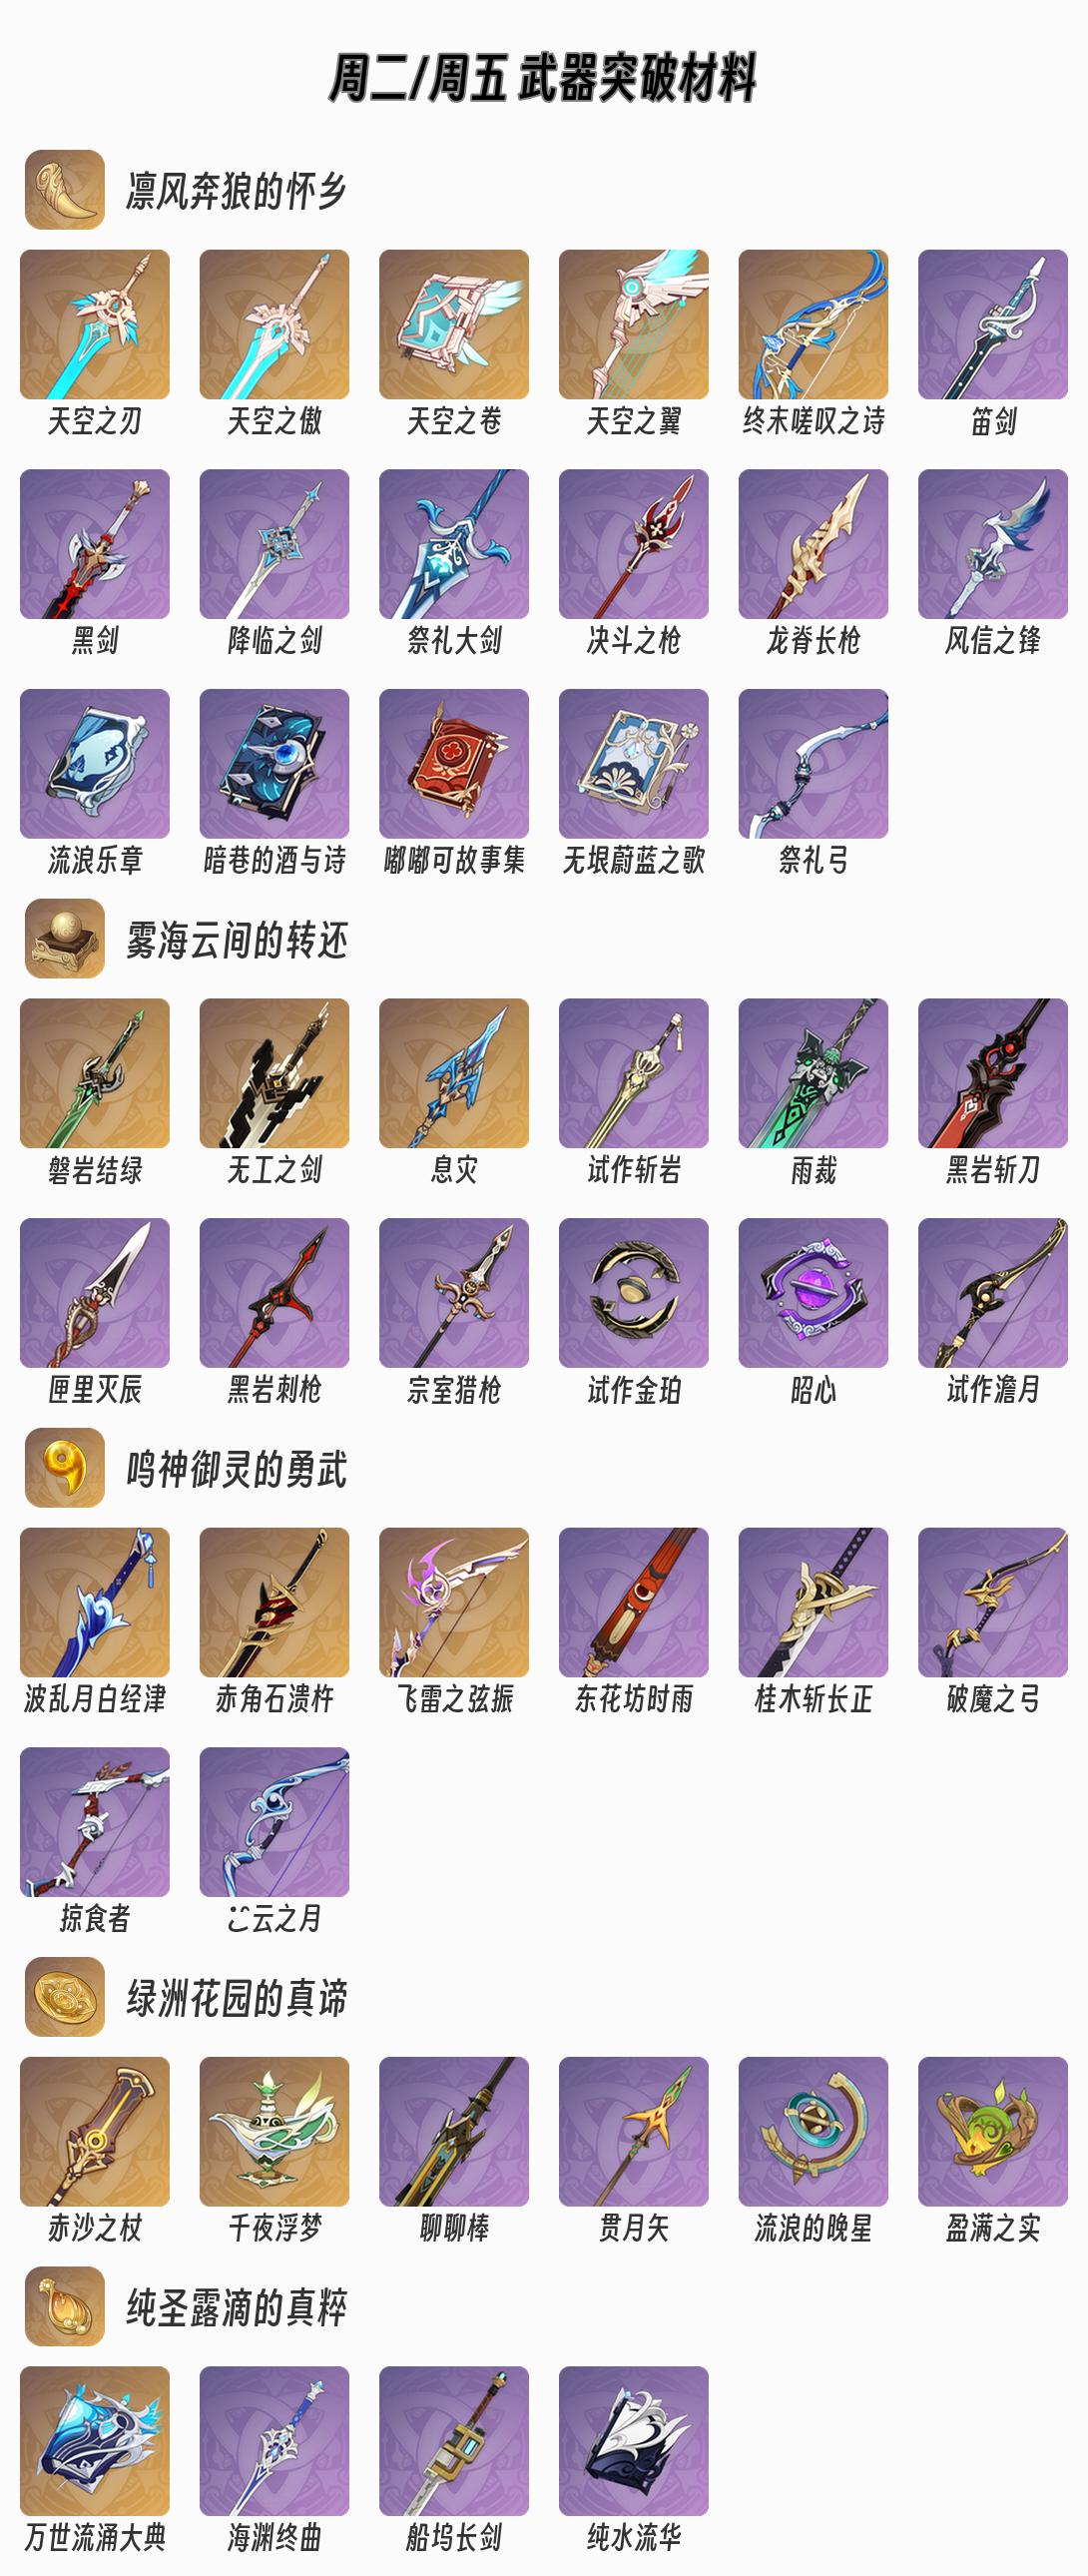 daily 2 weapon